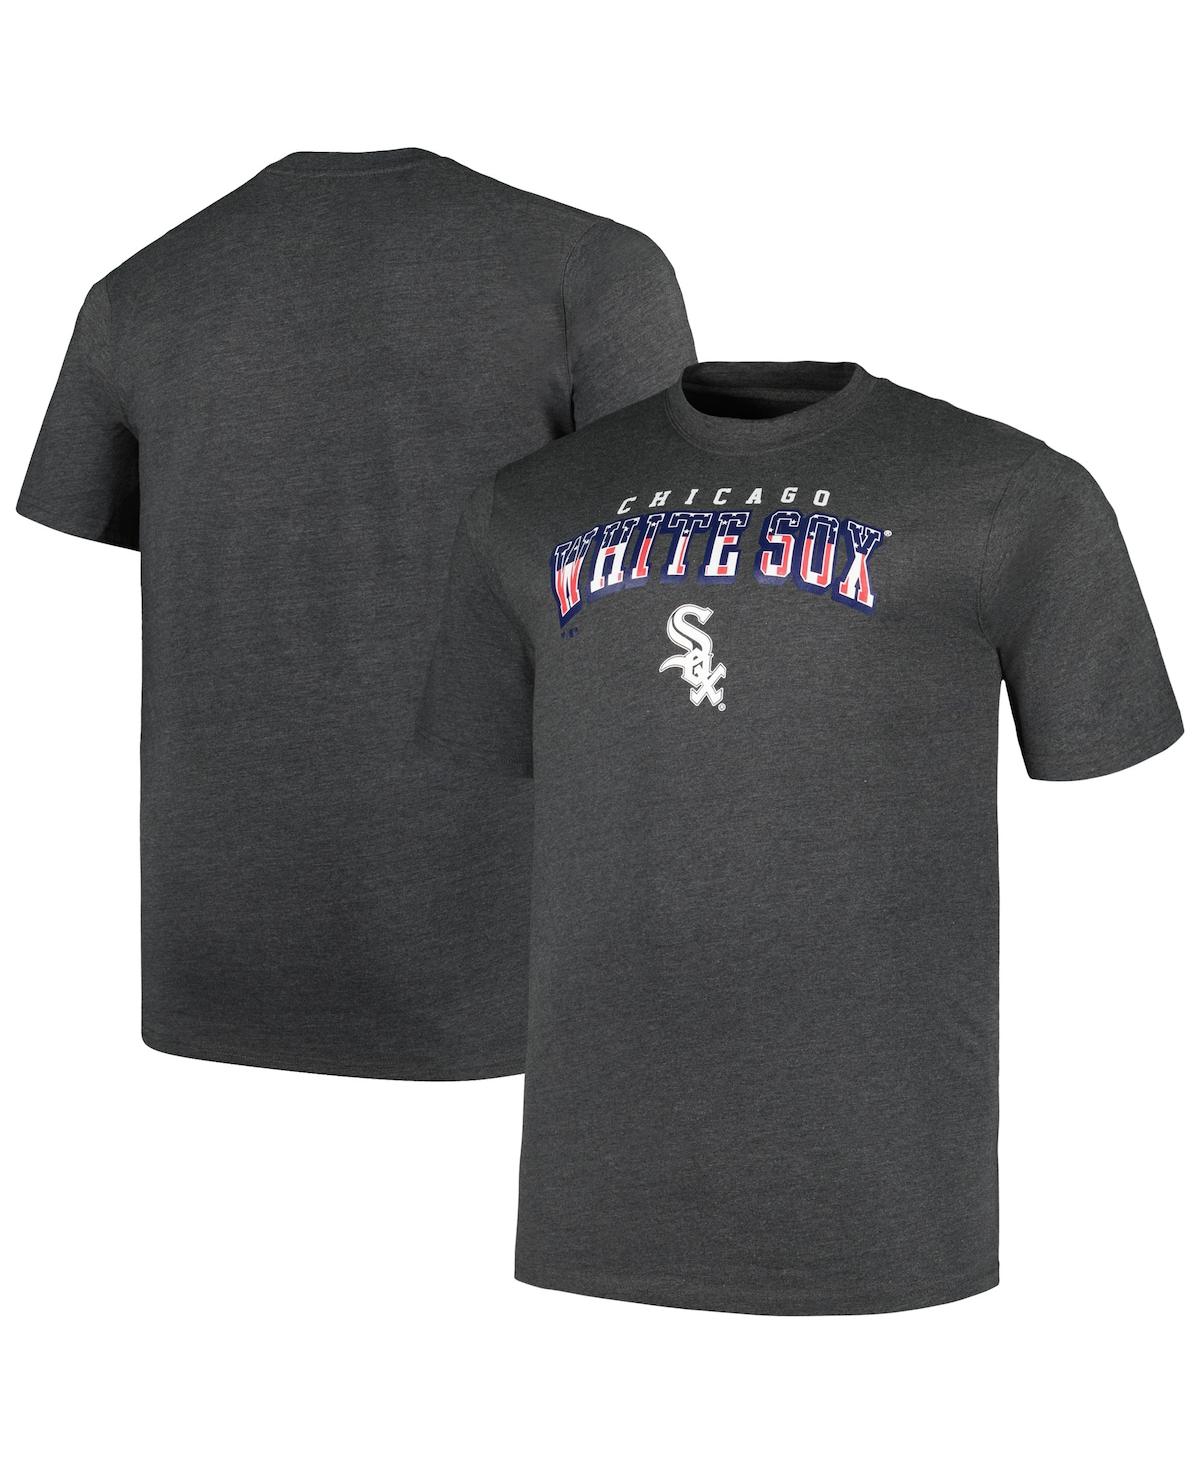 Men's Profile Heather Charcoal Chicago White Sox Big and Tall American T-shirt - Heather Charcoal